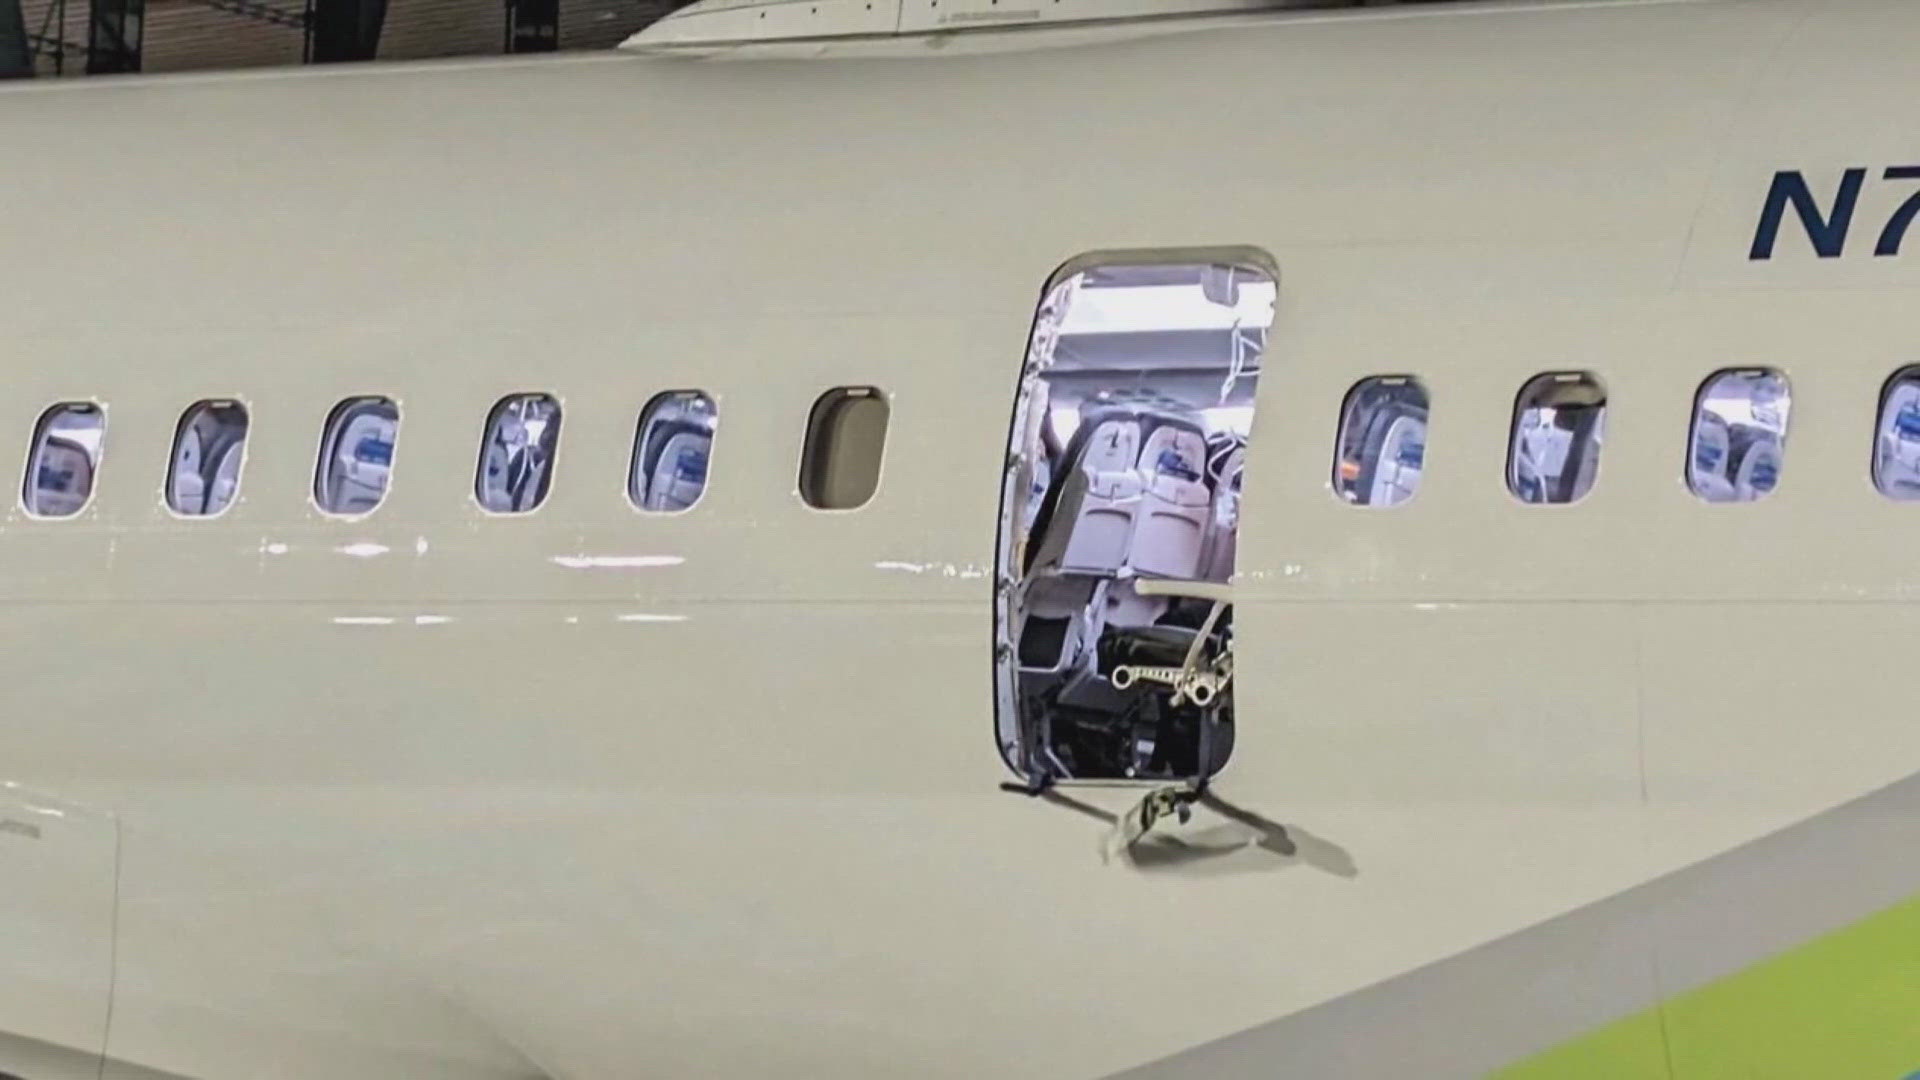 An FAA audit of 13 products by Boeing supplier Spirit Aerosystems, manufacturer of the door plug that blew out of a 737 recently, showed 7 products failed inspection